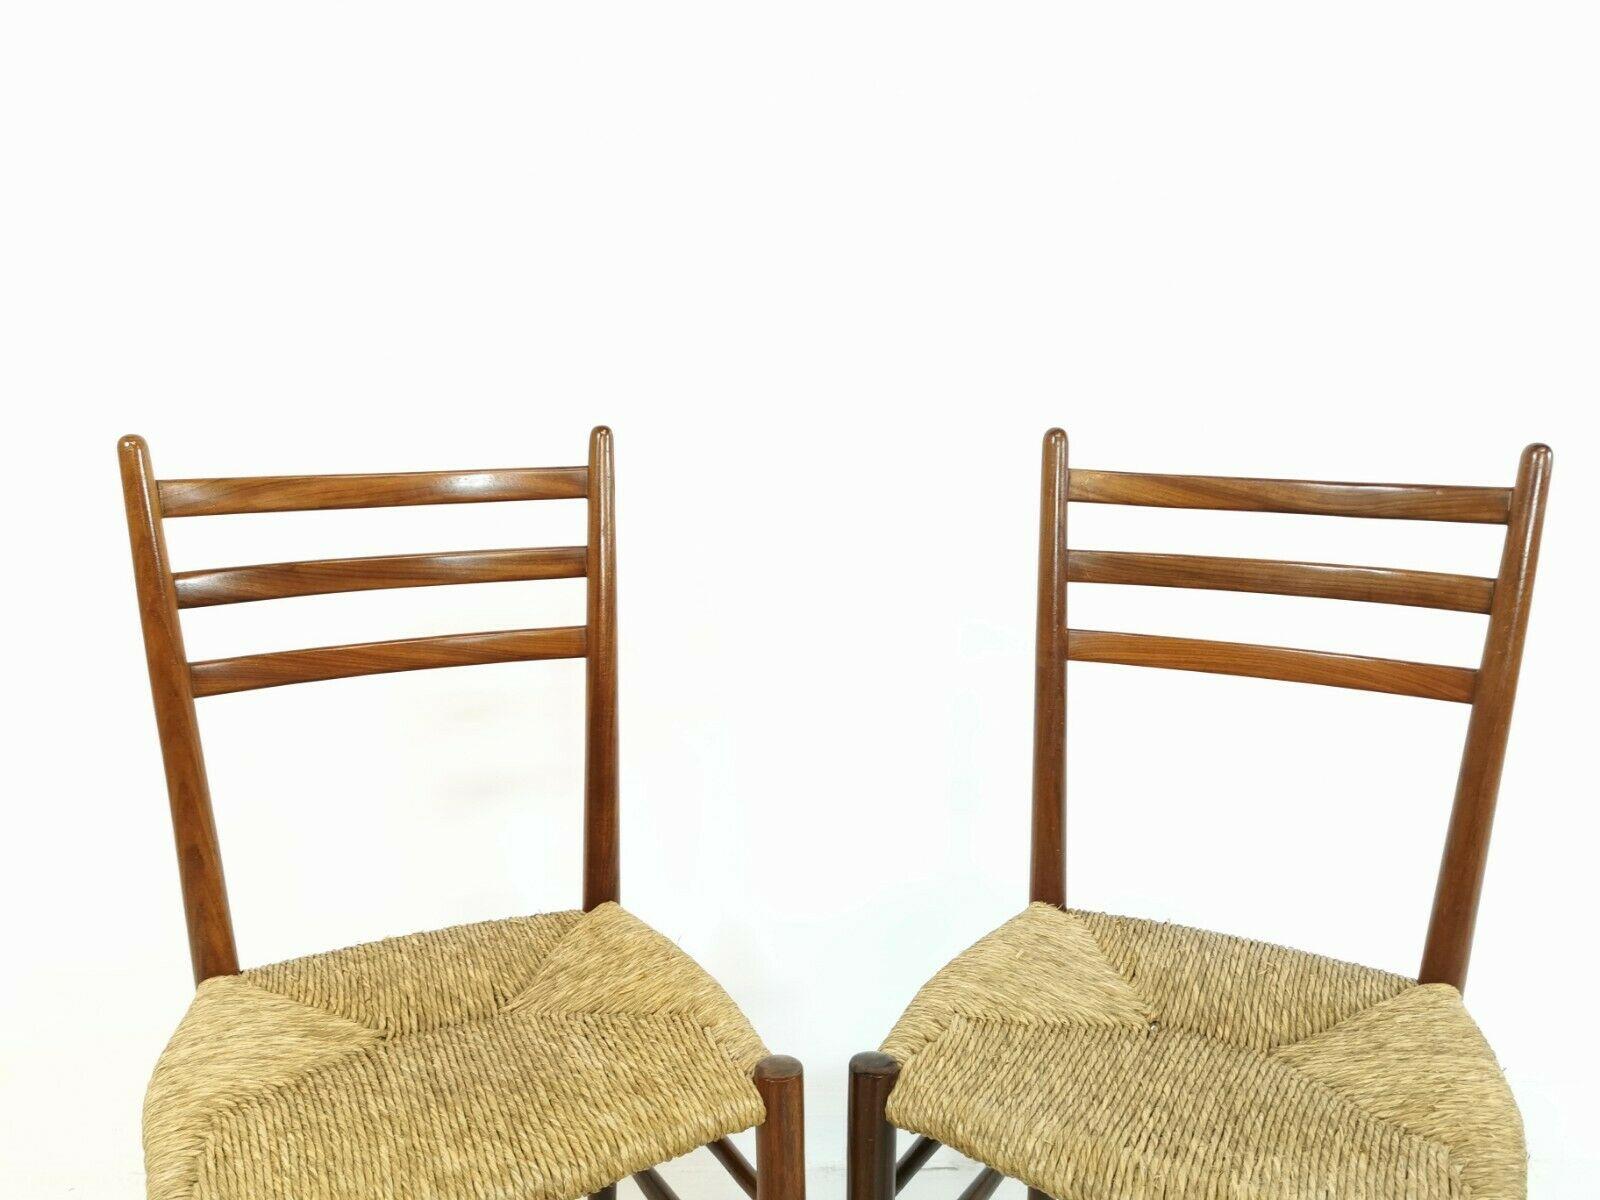 Made in Italy. Teak frames with rush seats. Dated to the 1950s-1960s. Price for the set.

Chairs bear a retailers label for 'Rooksmoor Mills' which used to be a high-quality furniture shop in Gloucestershire. 

Classic and stylish